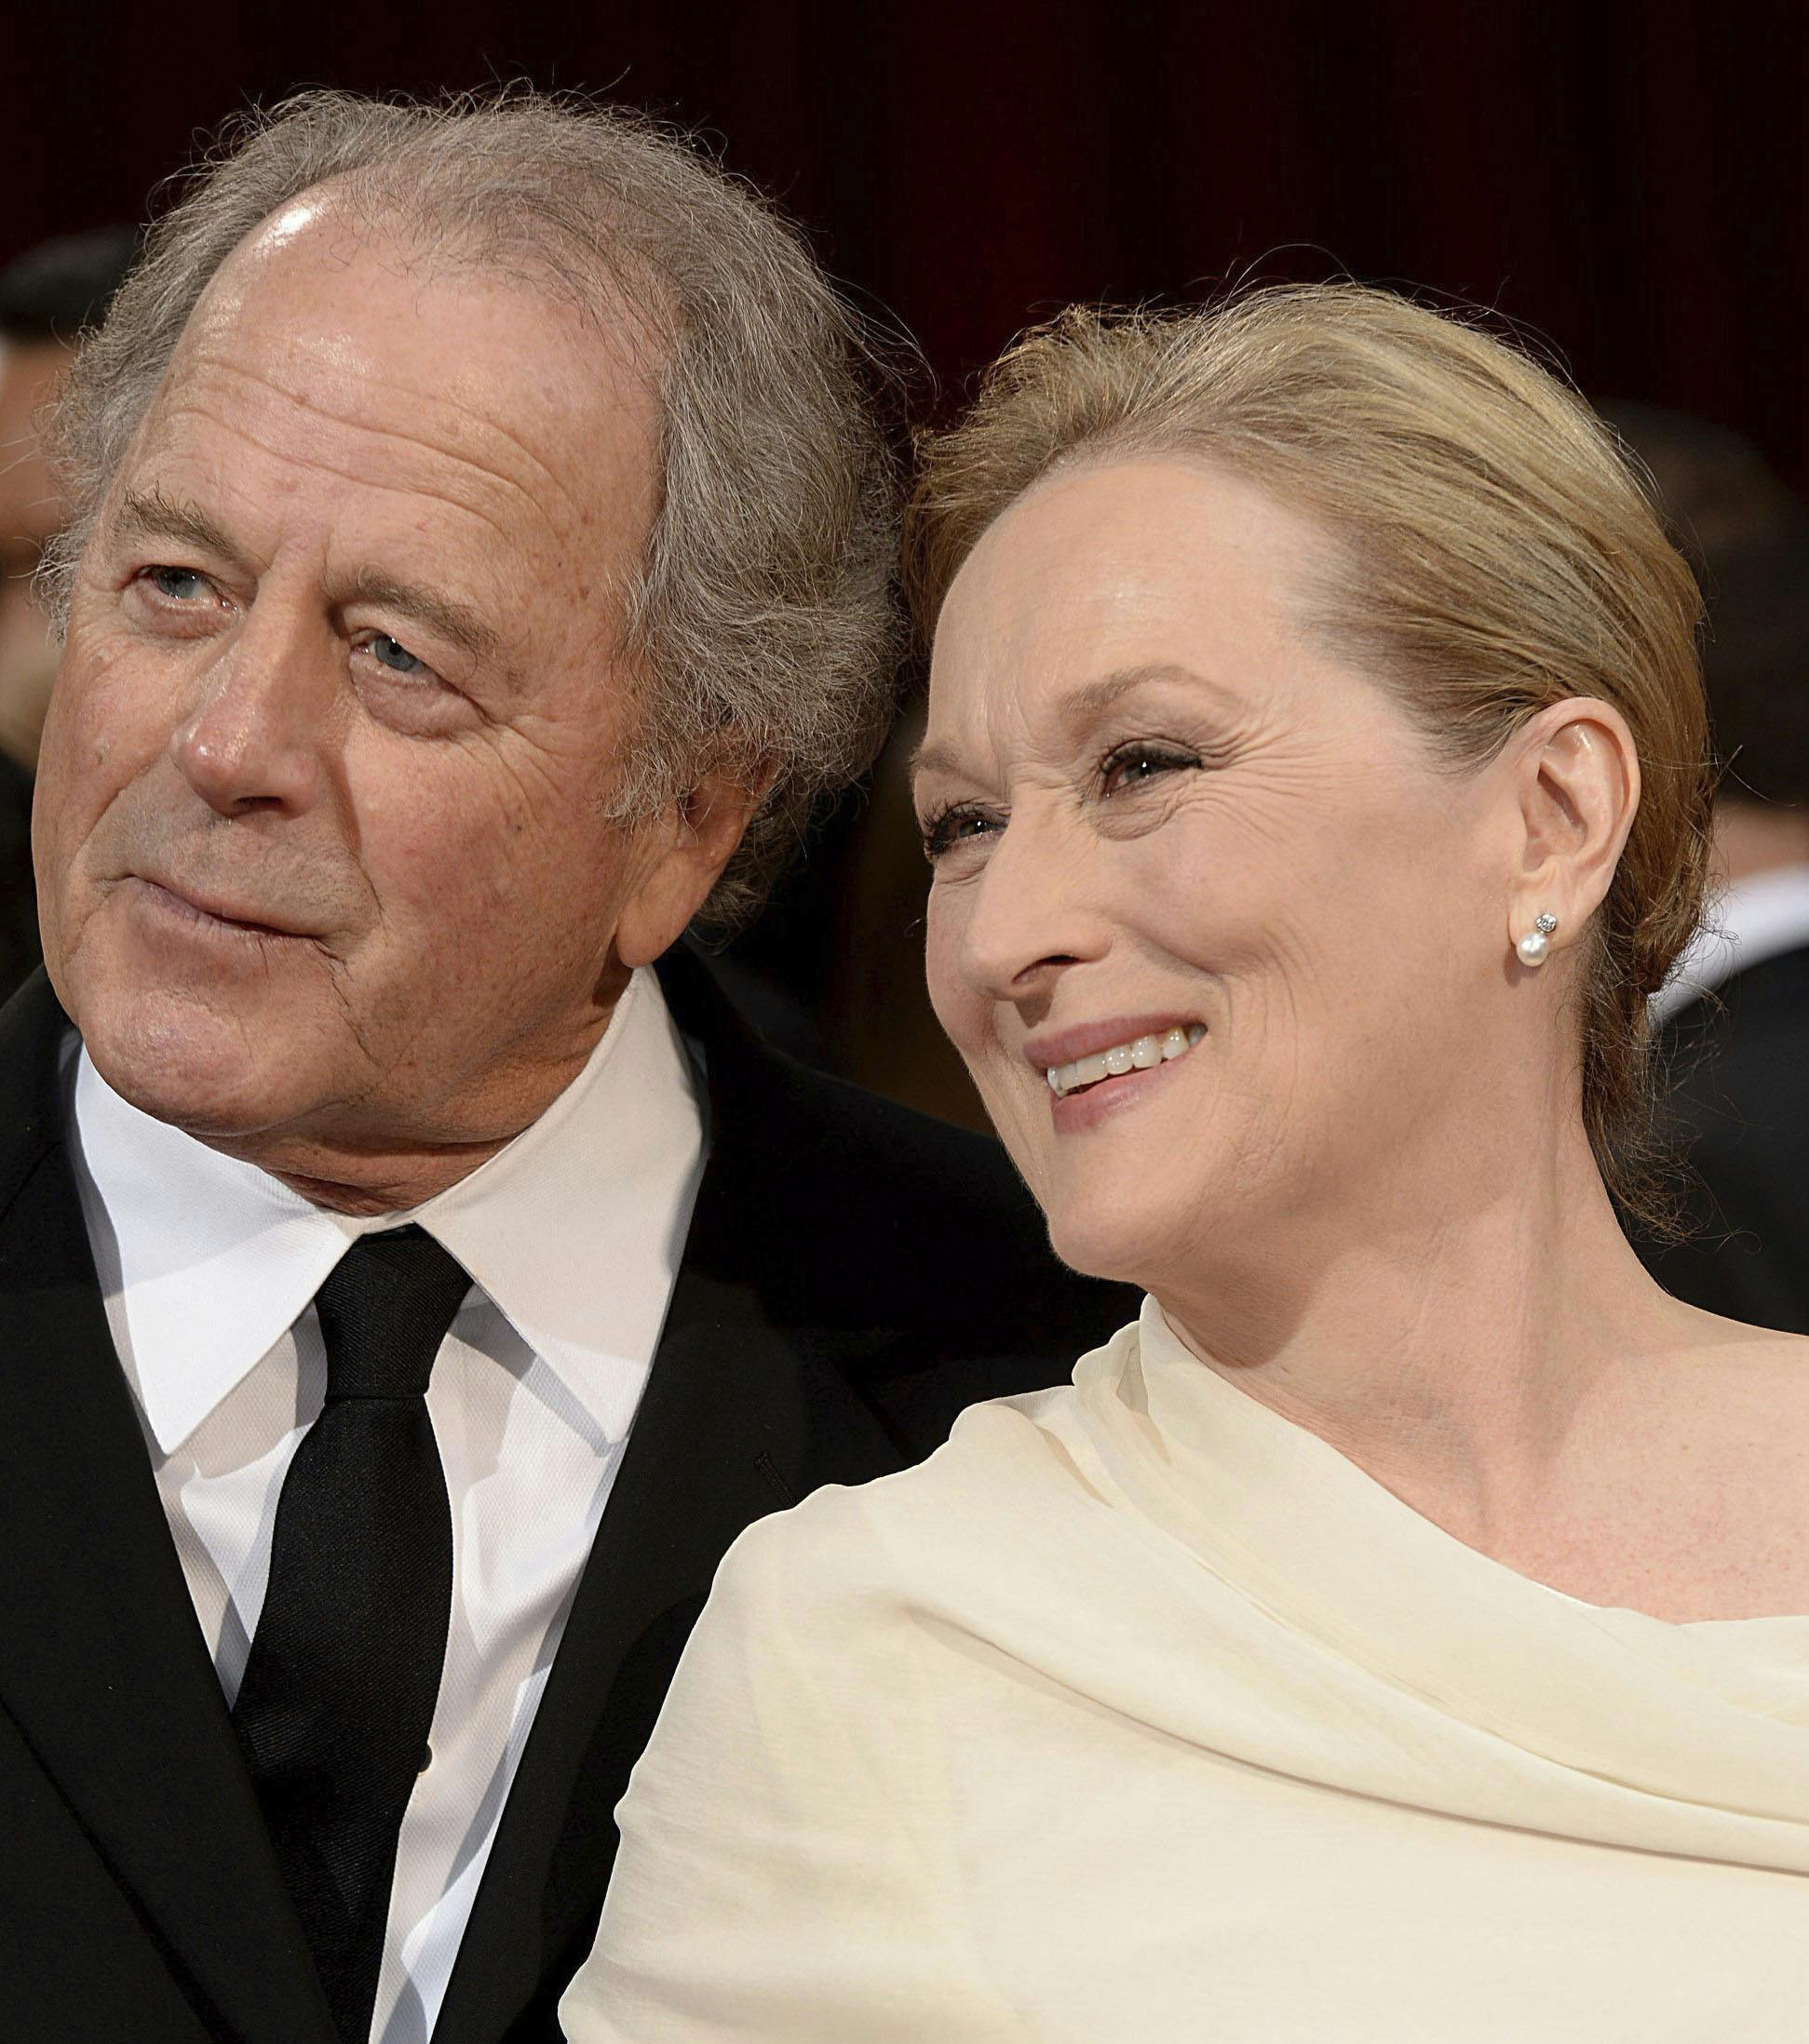 OCTOBER 21st 2023: Academy Award winning actress Meryl Streep and her husband Don Gummer announce they have been separated for six years. They married in 1978. - File Photo by: zz/Doug Peters/STAR MAX/IPx 2014 3/2/14 Meryl Streep and her husband Don Gummer at the 86th Annual Academy Awards (Oscars) held on March 2, 2014 in Hollywood, Los Angeles, California.